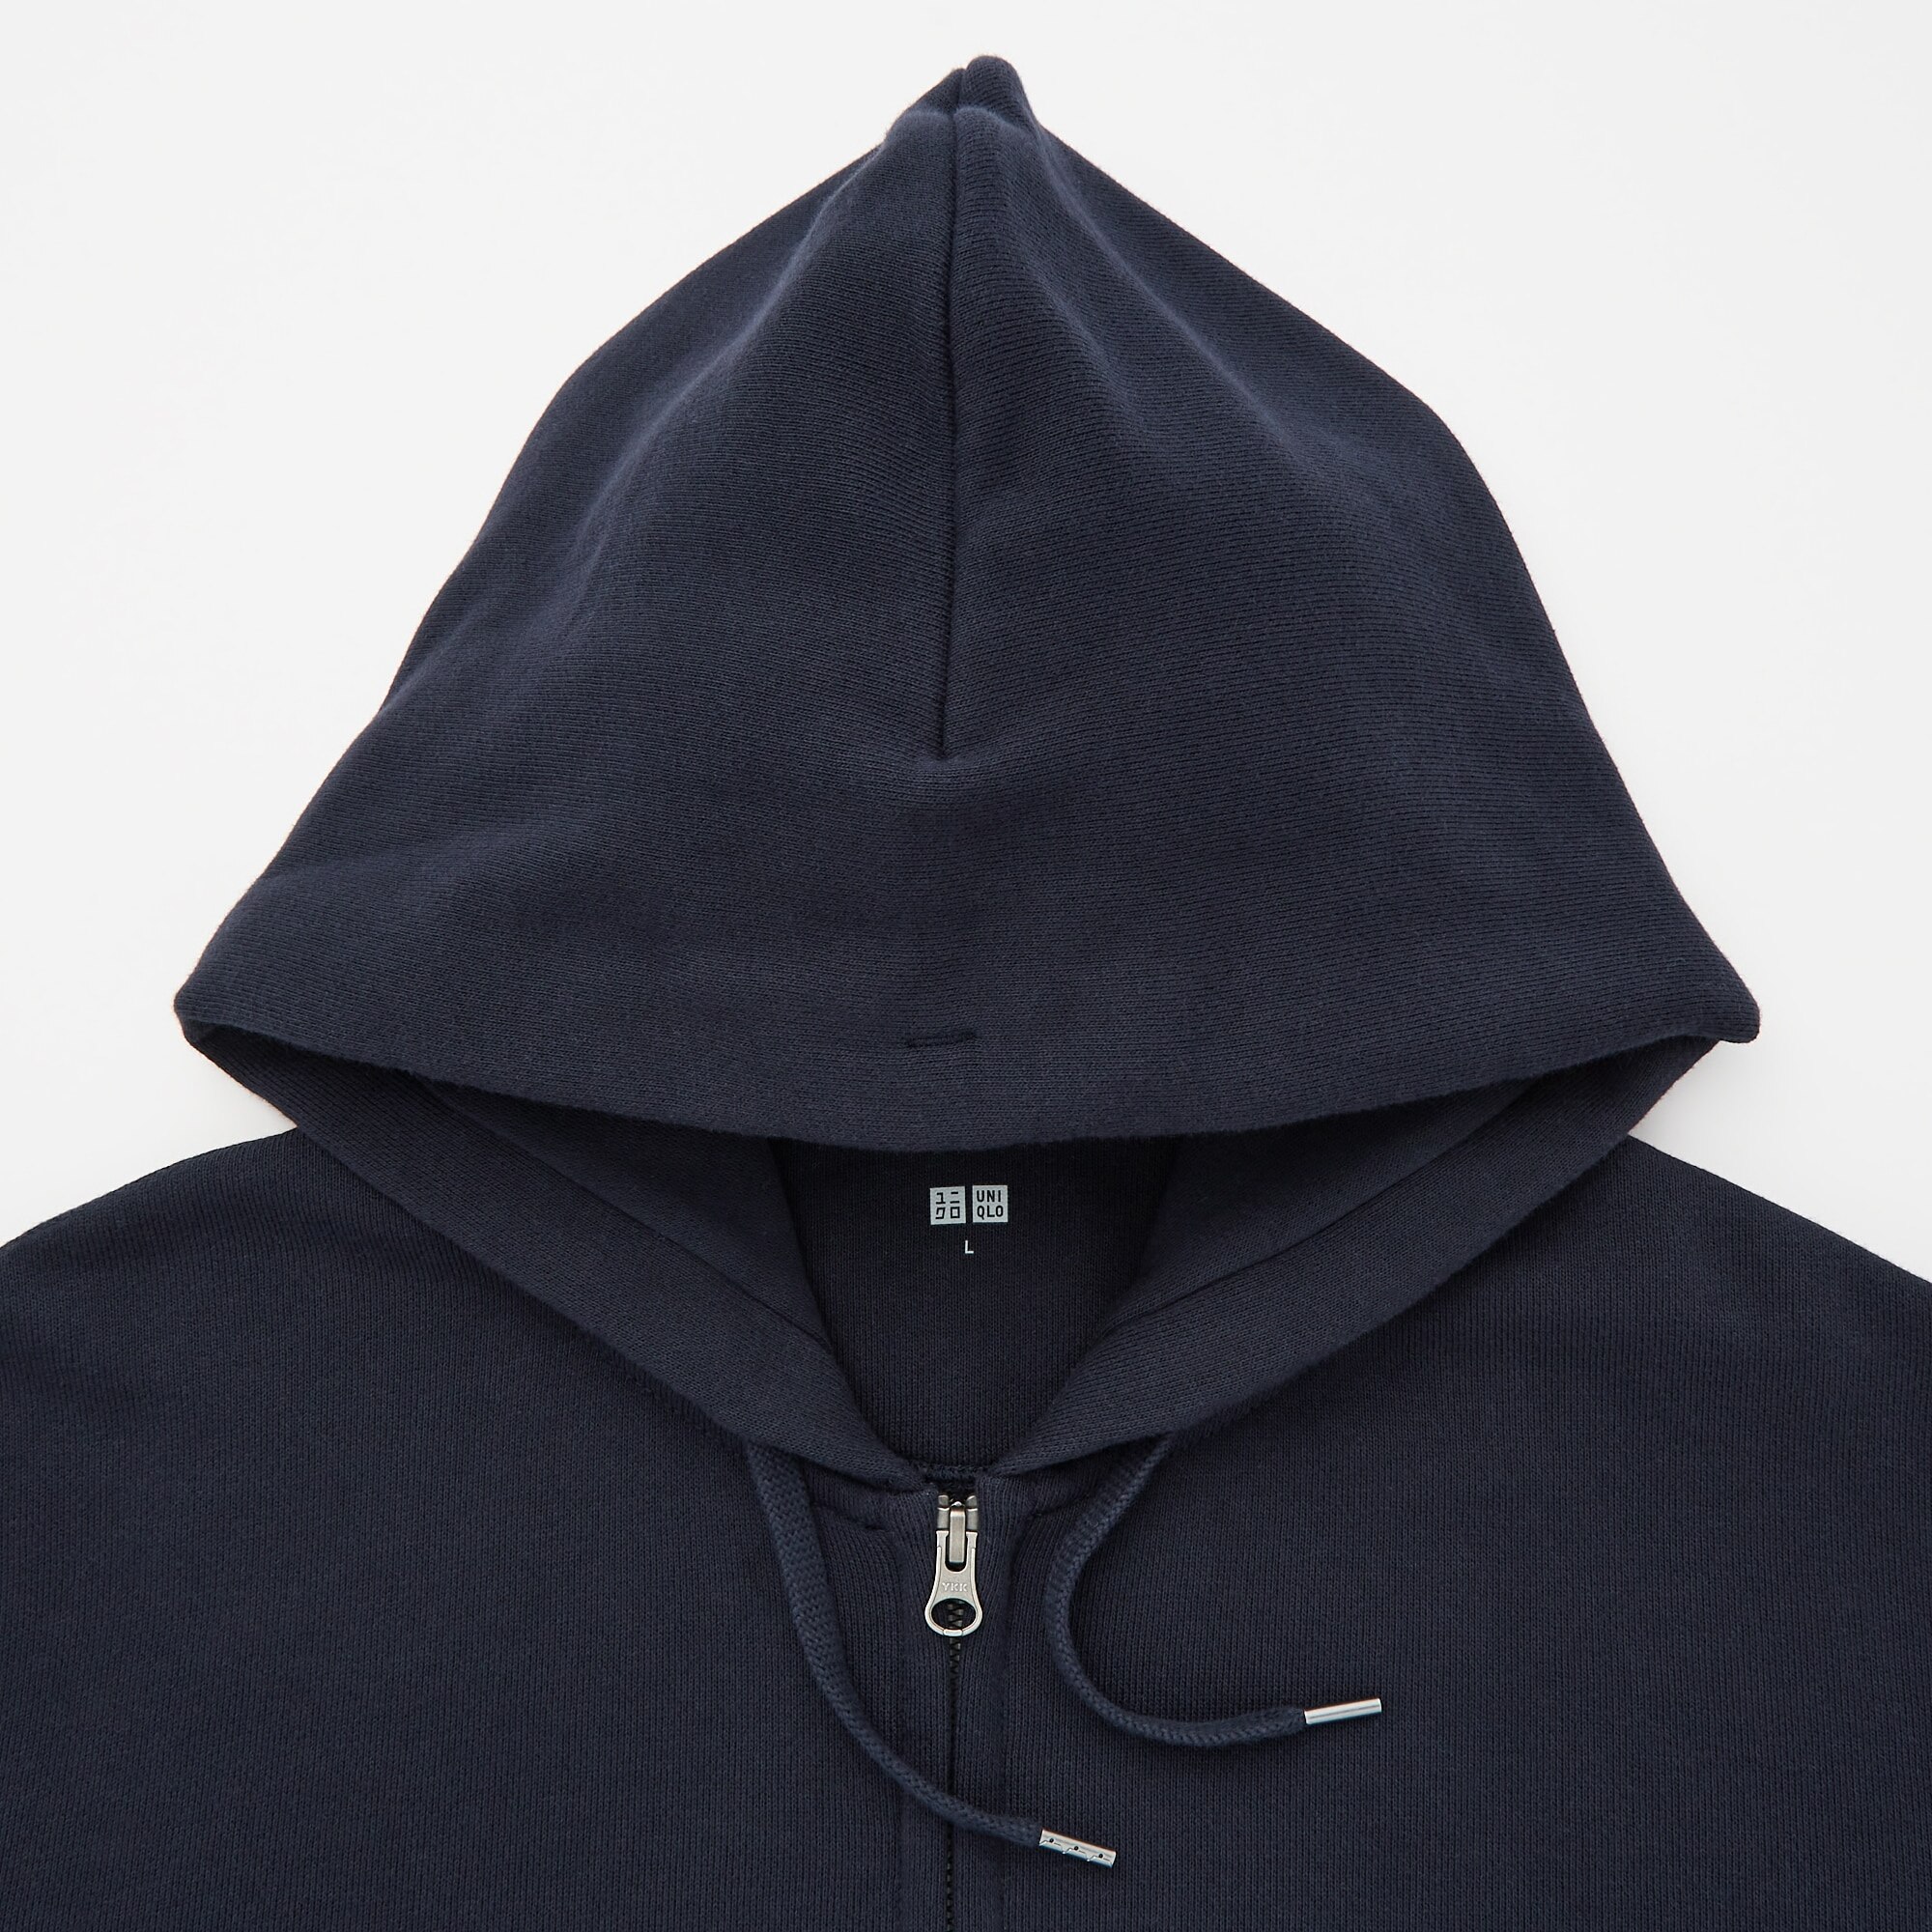 Uniqlo PileLined Hoodie Review  YouTube